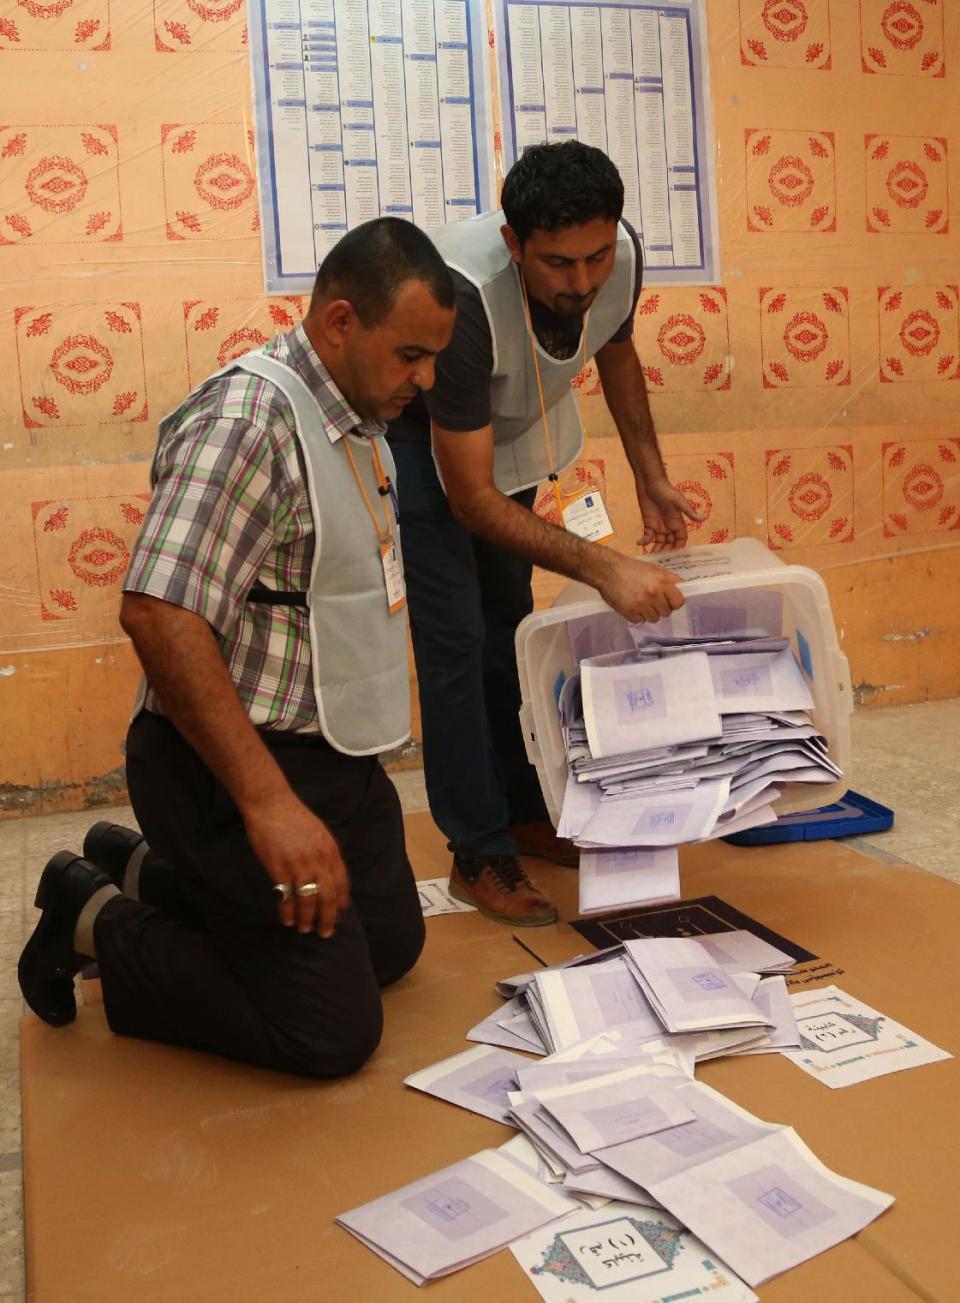 Electoral workers count ballots as polls close at a polling center in Basra, Iraq's second-largest city, 340 miles (550 kilometers) southeast of Baghdad, Iraq, Wednesday, April 30, 2014. Iraqis braved the threat of bombs and other violence to vote Wednesday in parliamentary elections amid a massive security operation as the country slides deeper into sectarian strife. (AP Photo/ Nabil al-Jurani)